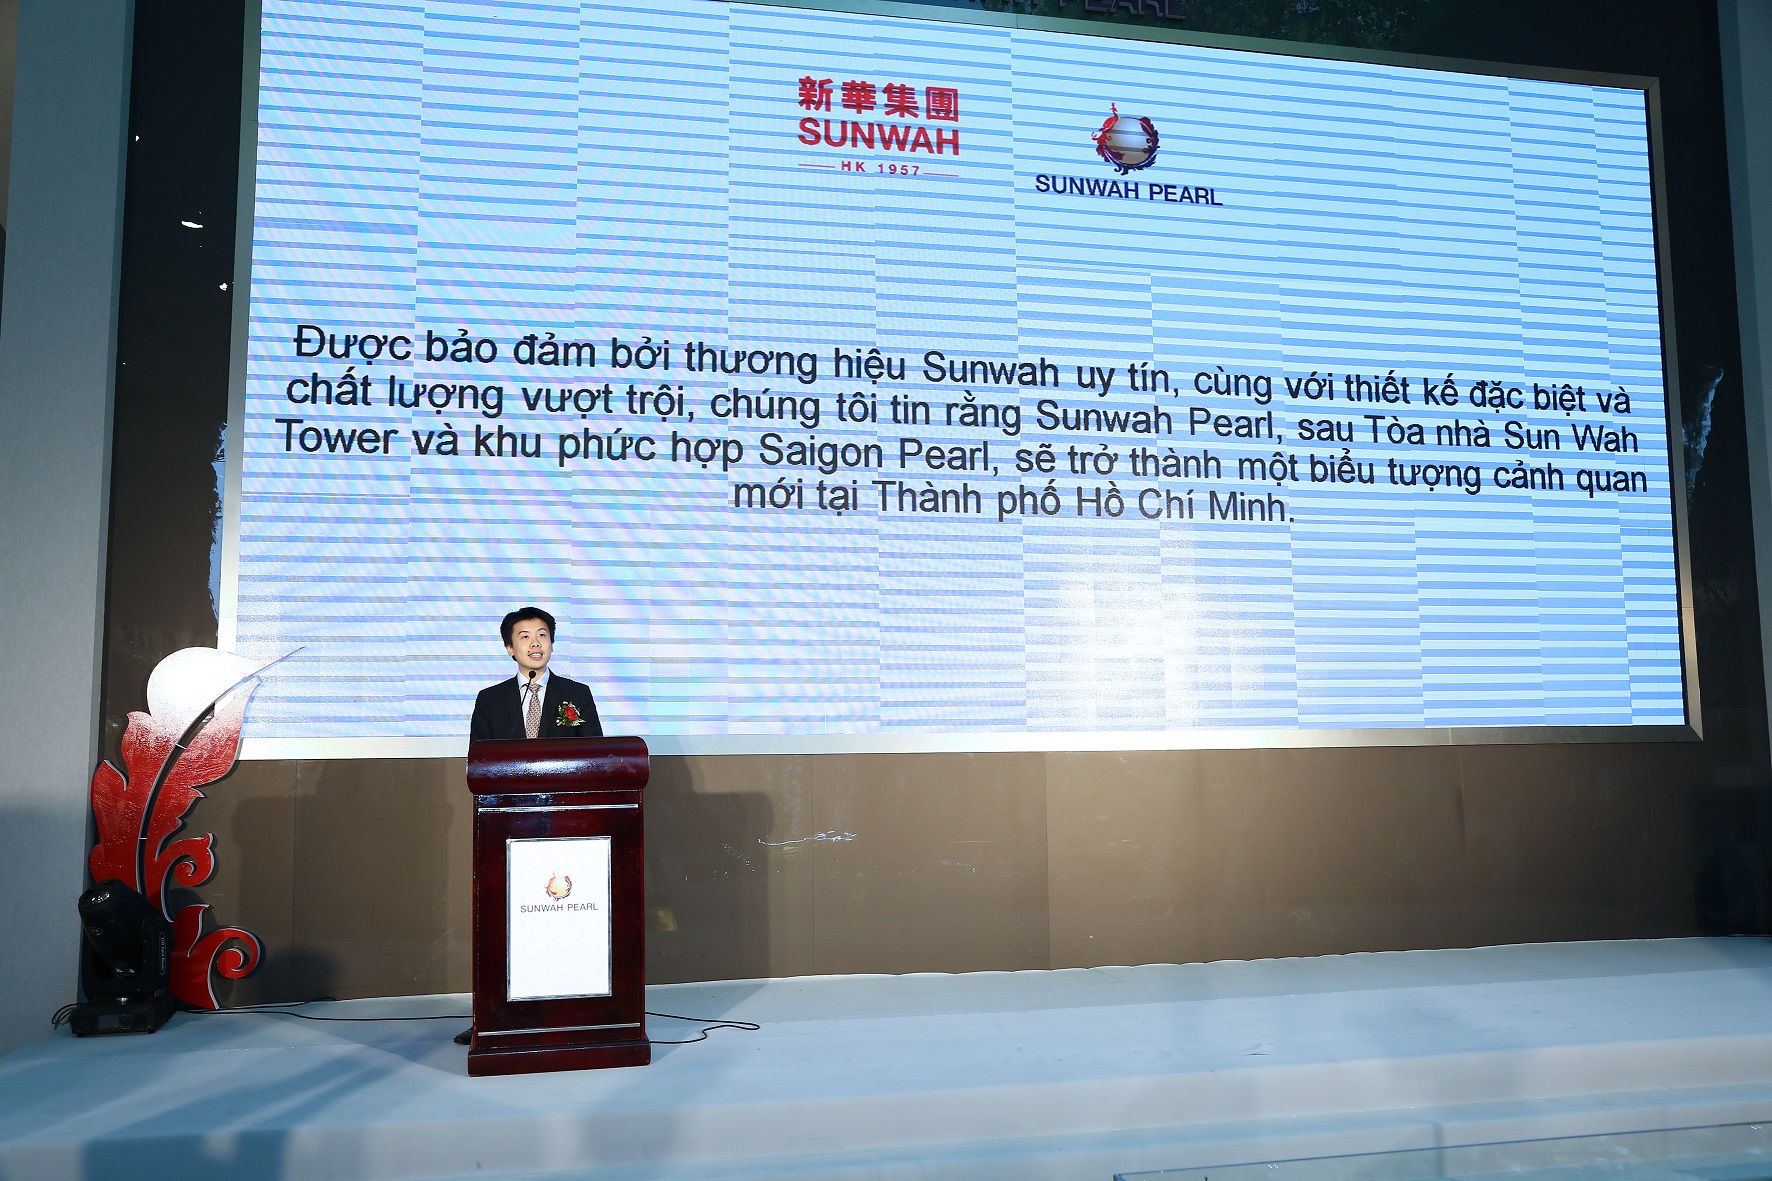 Mr Johnson Choi delivered Opening Speech at Sunwah Pearl Project Launch Ceremony in Vietnam